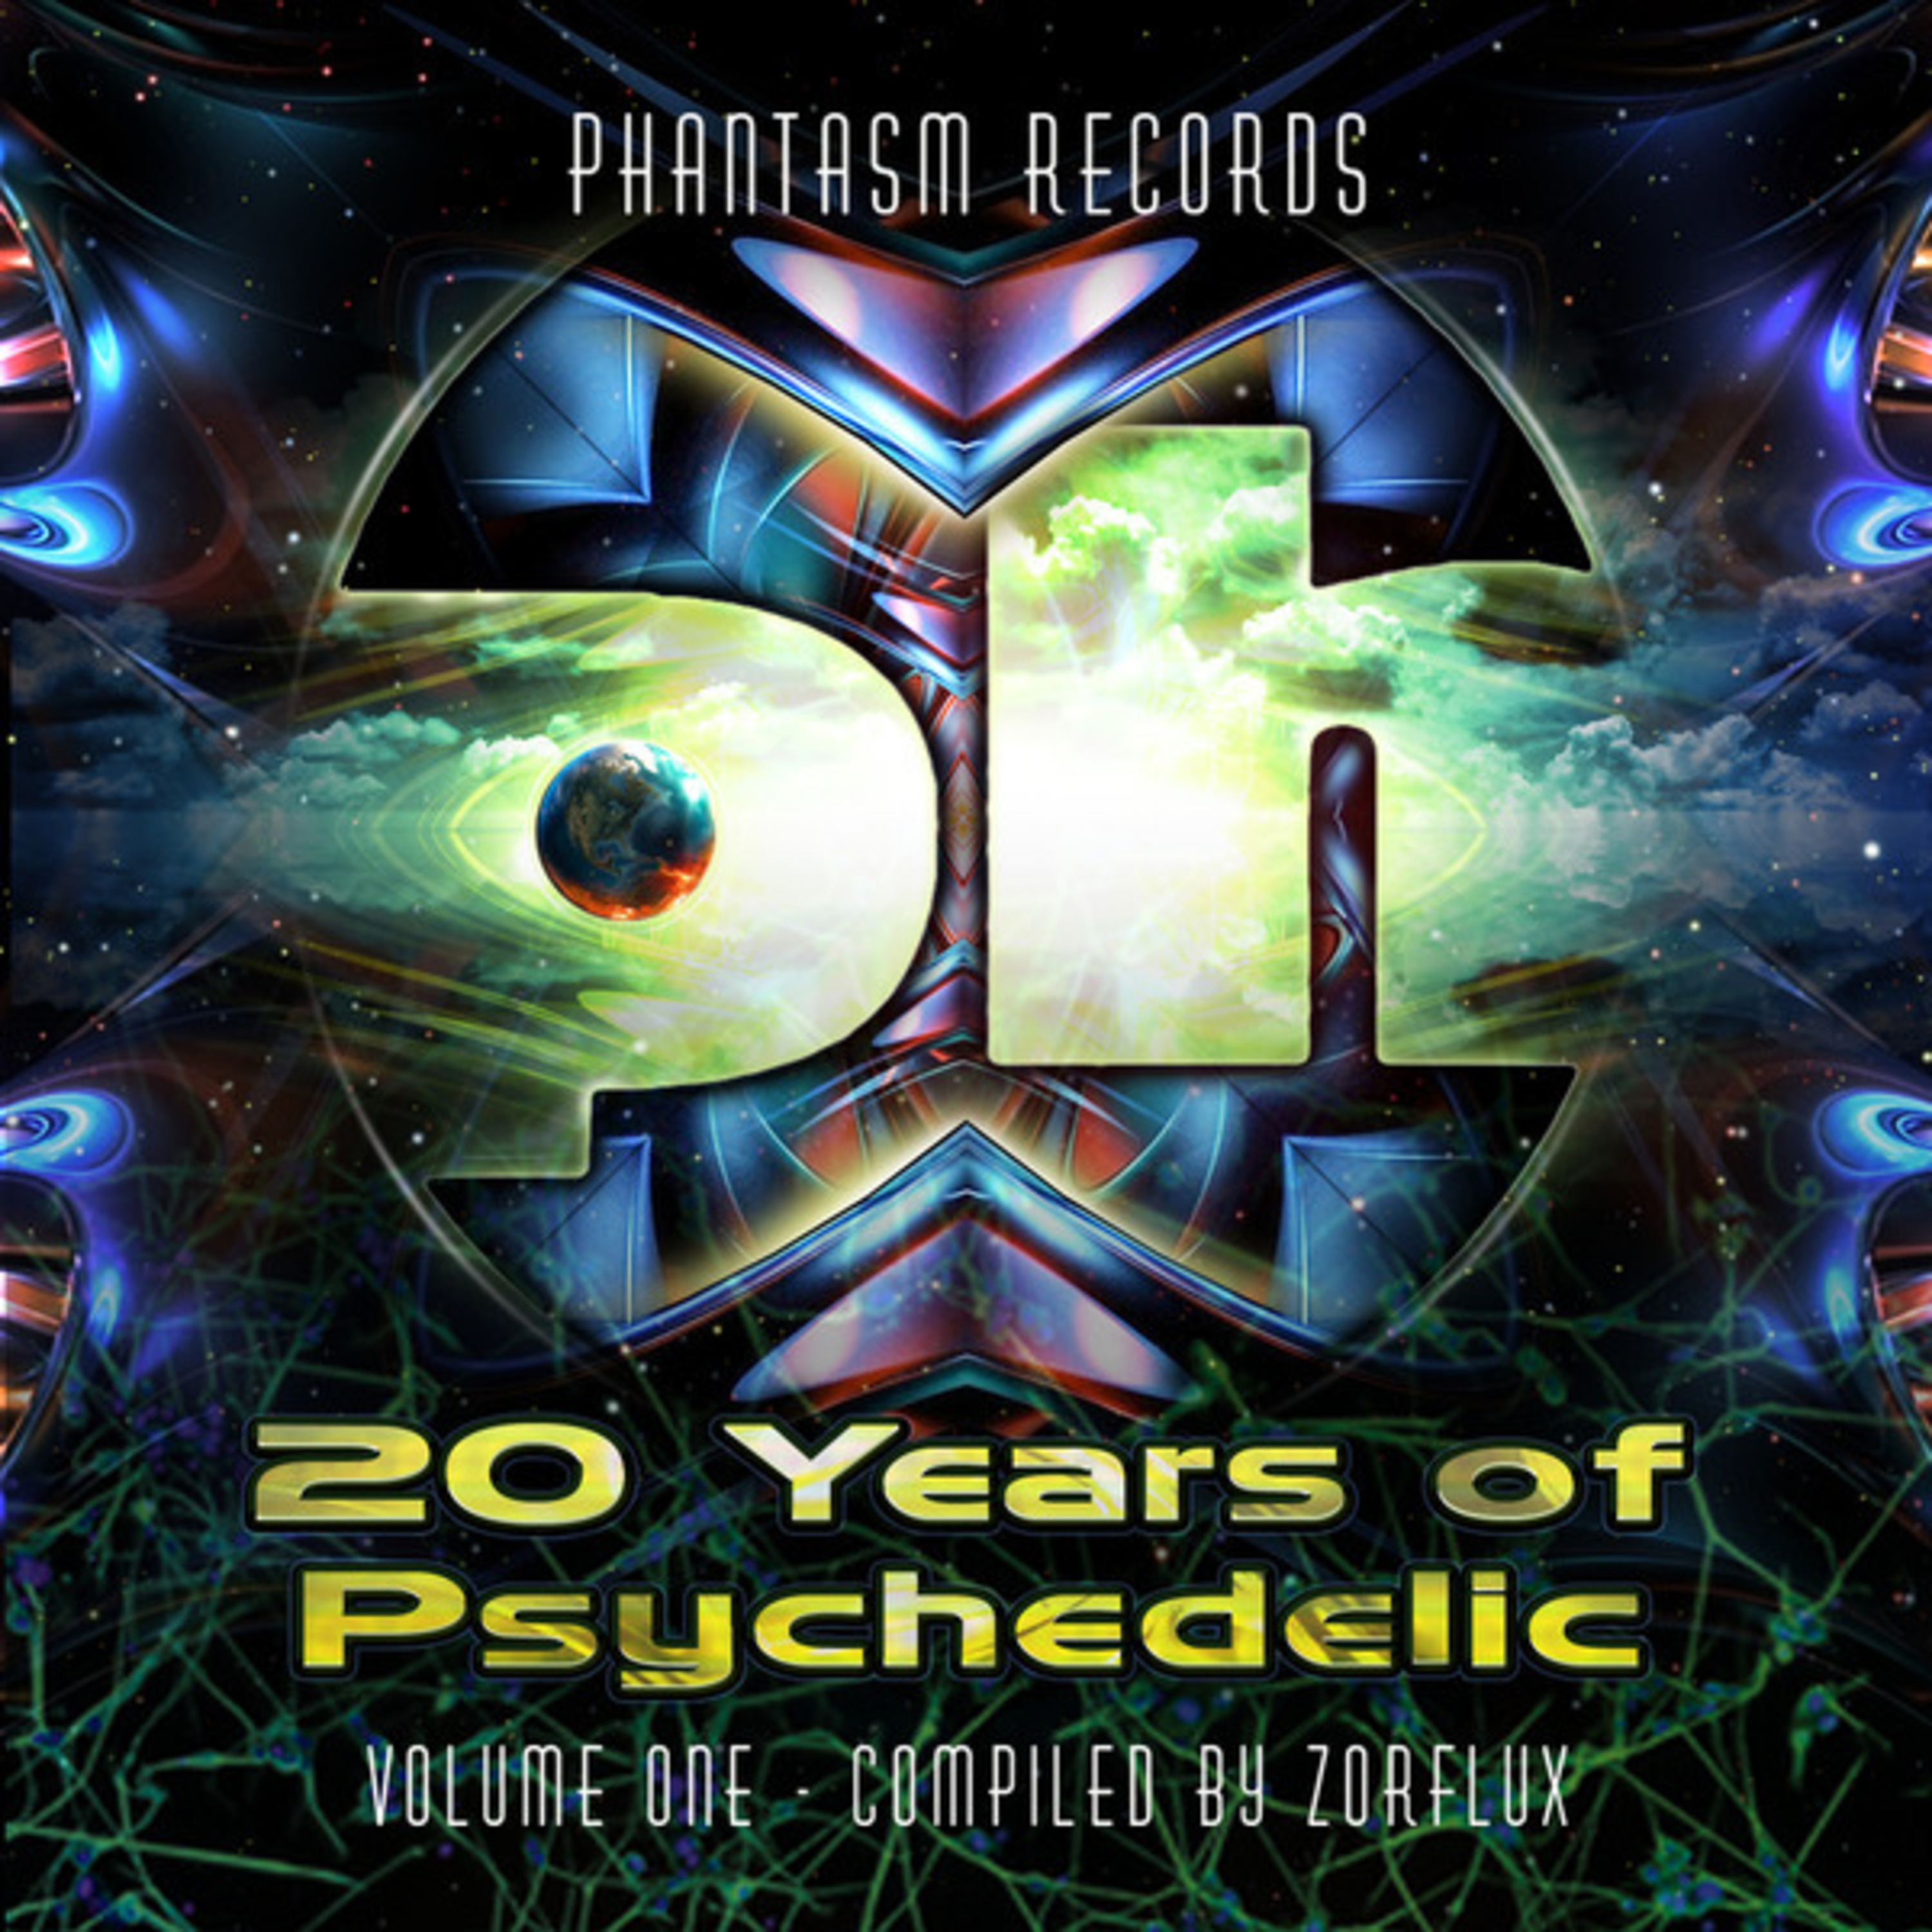 20 Years Of Psychedelic - Volume 1 - Compiled by Zorflux